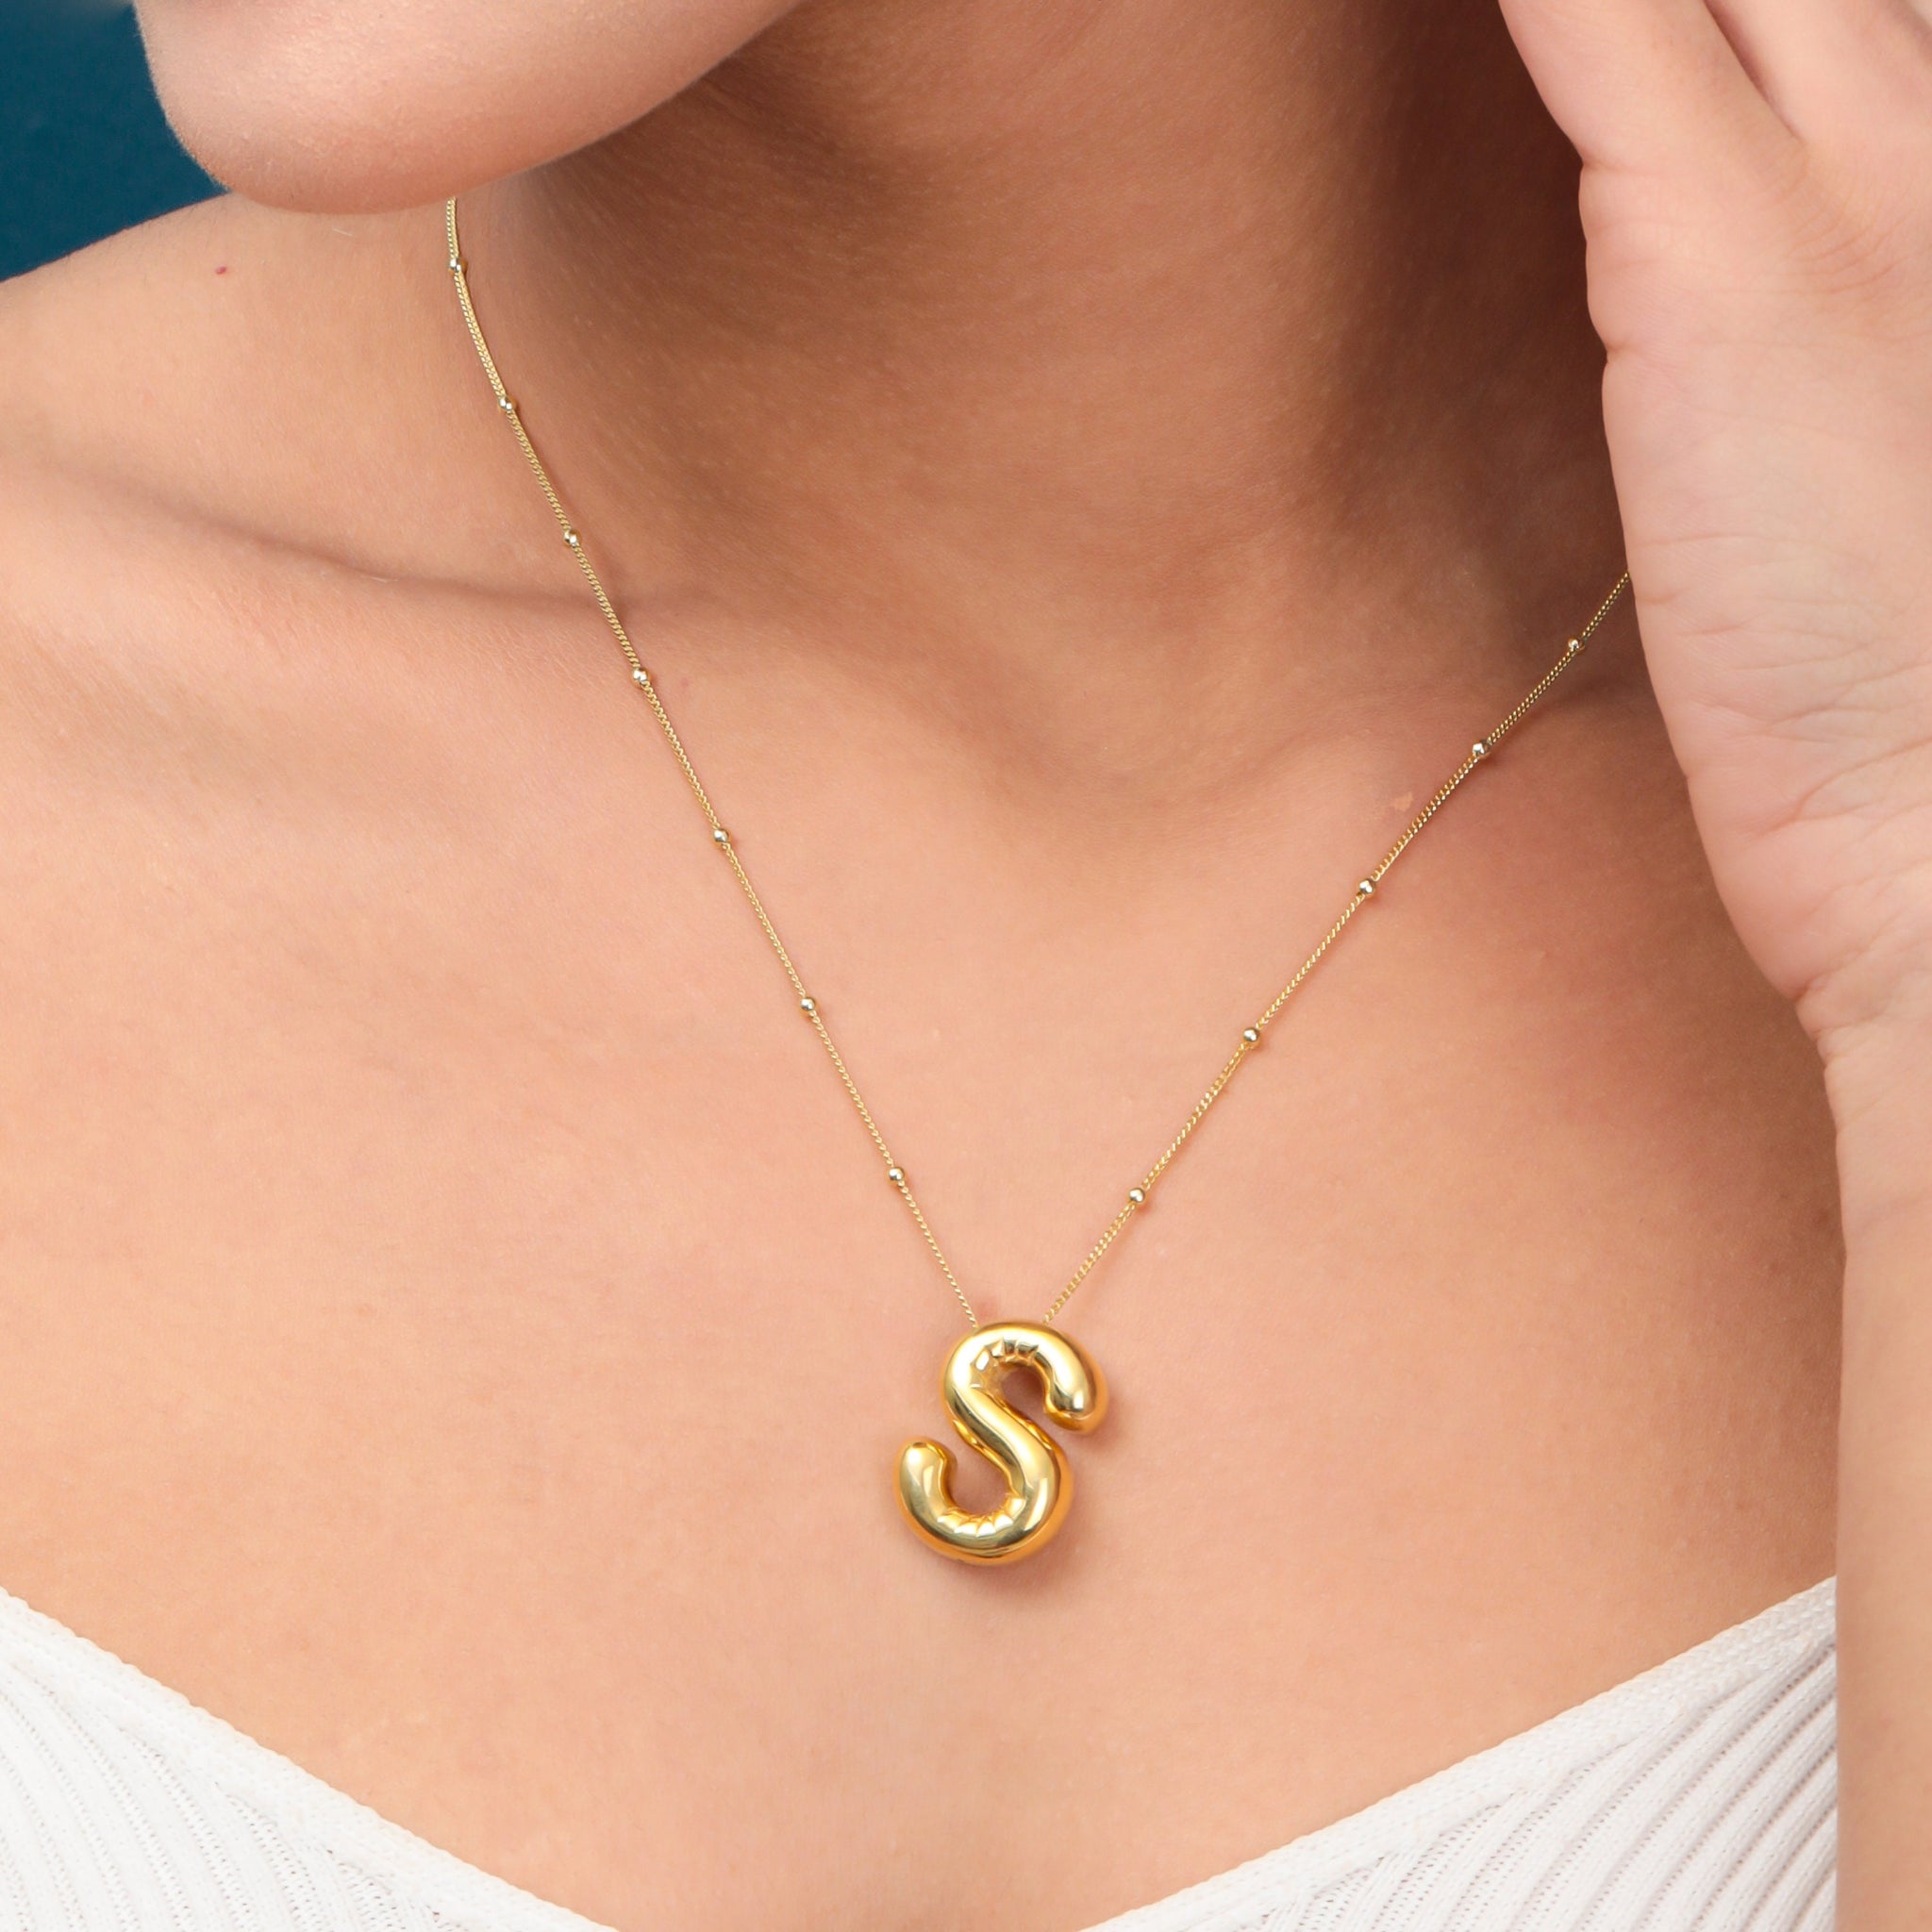 Balloon Letter Necklace Gold Filled Gourmet Chain Option Balloon Initial Necklace Puff Necklace Bubble Letter Necklace Bridesmaid Gift